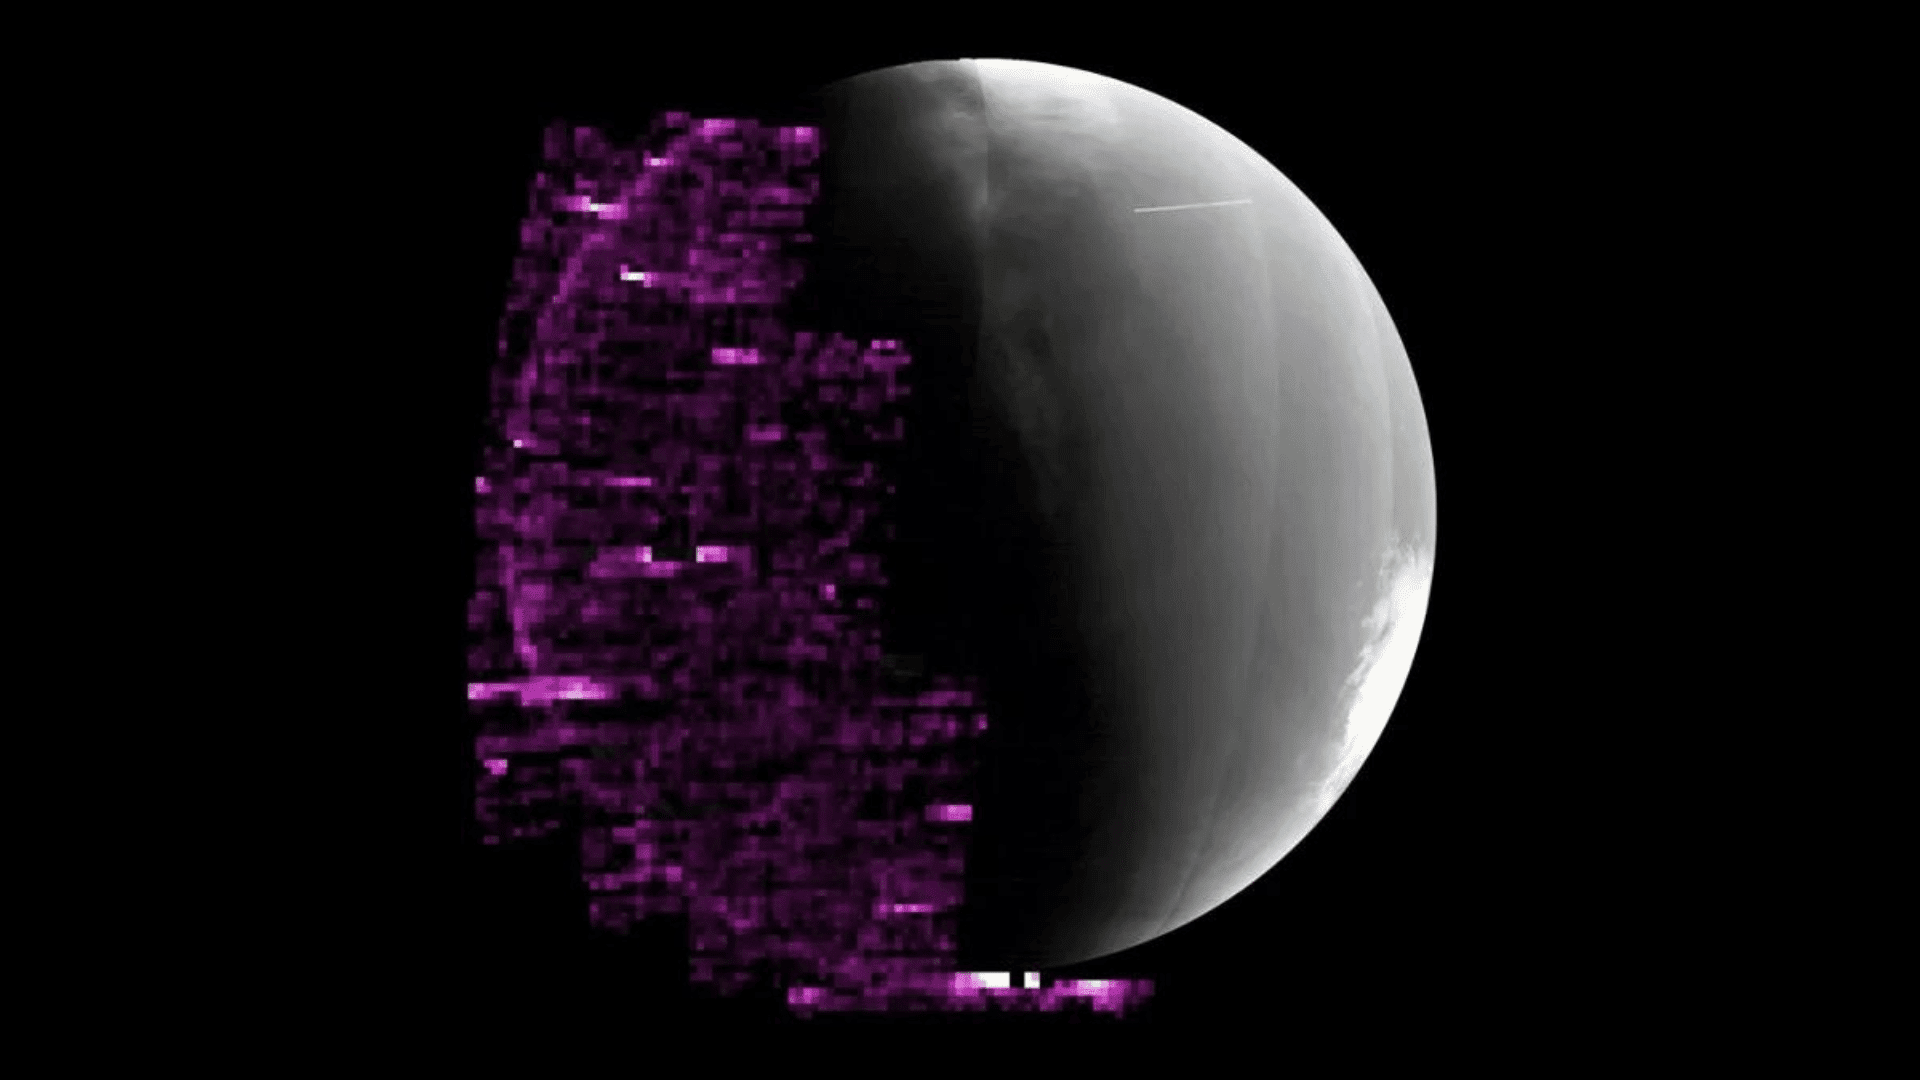 The bright purple color depicts auroras on Mars’ nightside that were detected by the ultraviolet instrument aboard NASA’s MAVEN orbiter JPL